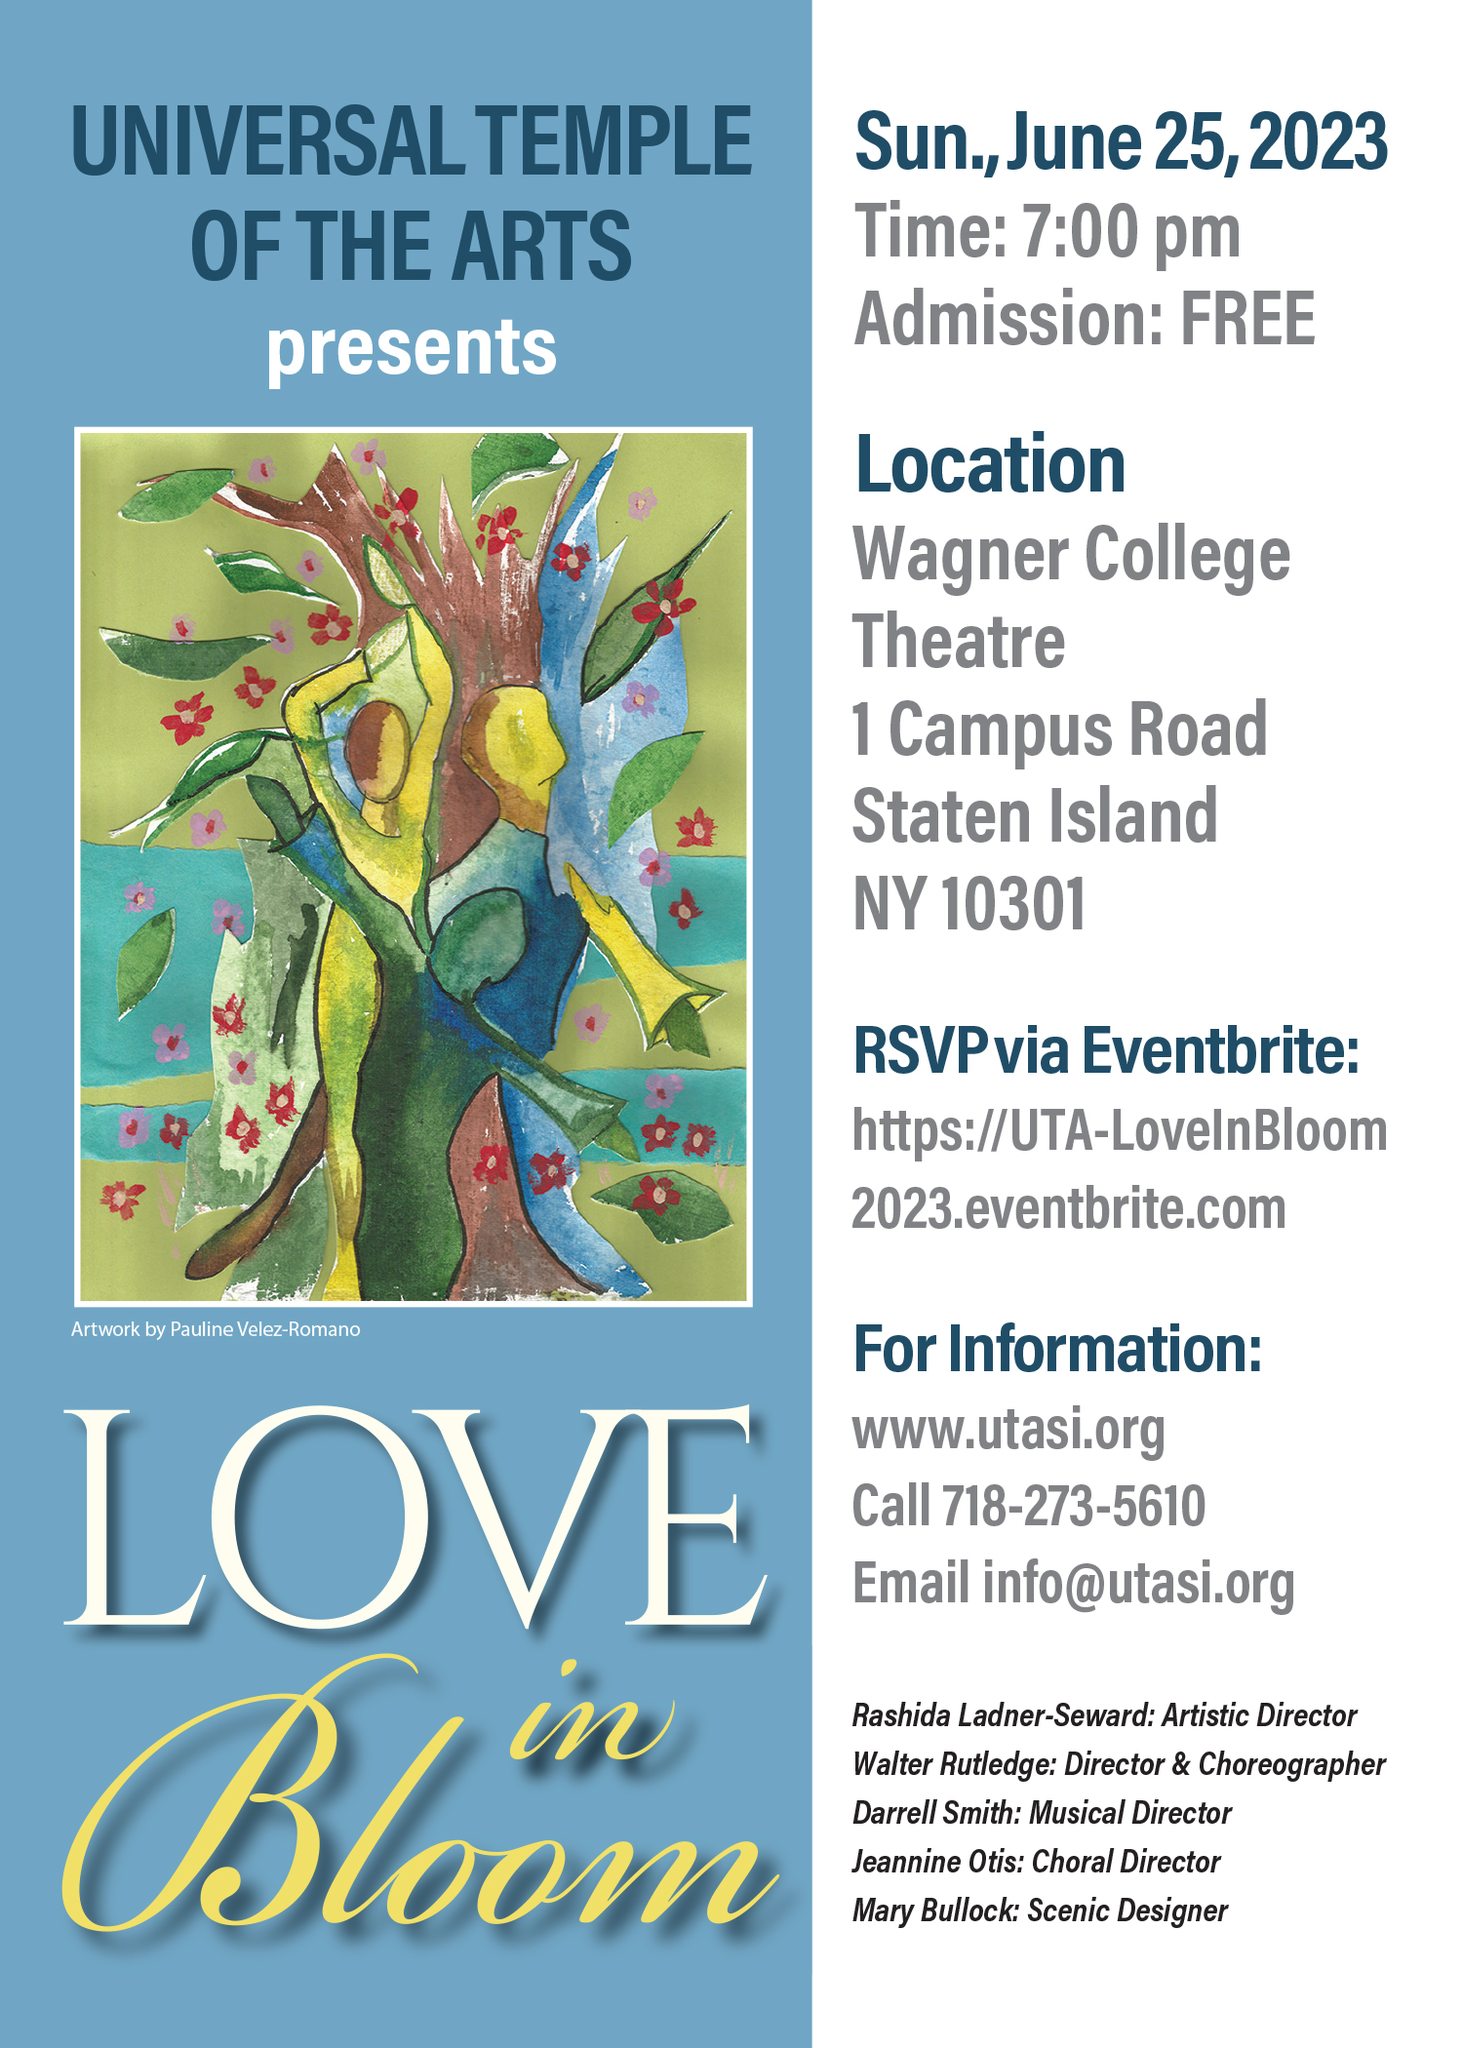 Flyer for the Love in Bloom event, a performance featuring dance, music, visual art, and poetry presented by the Universal Temple of the Arts.